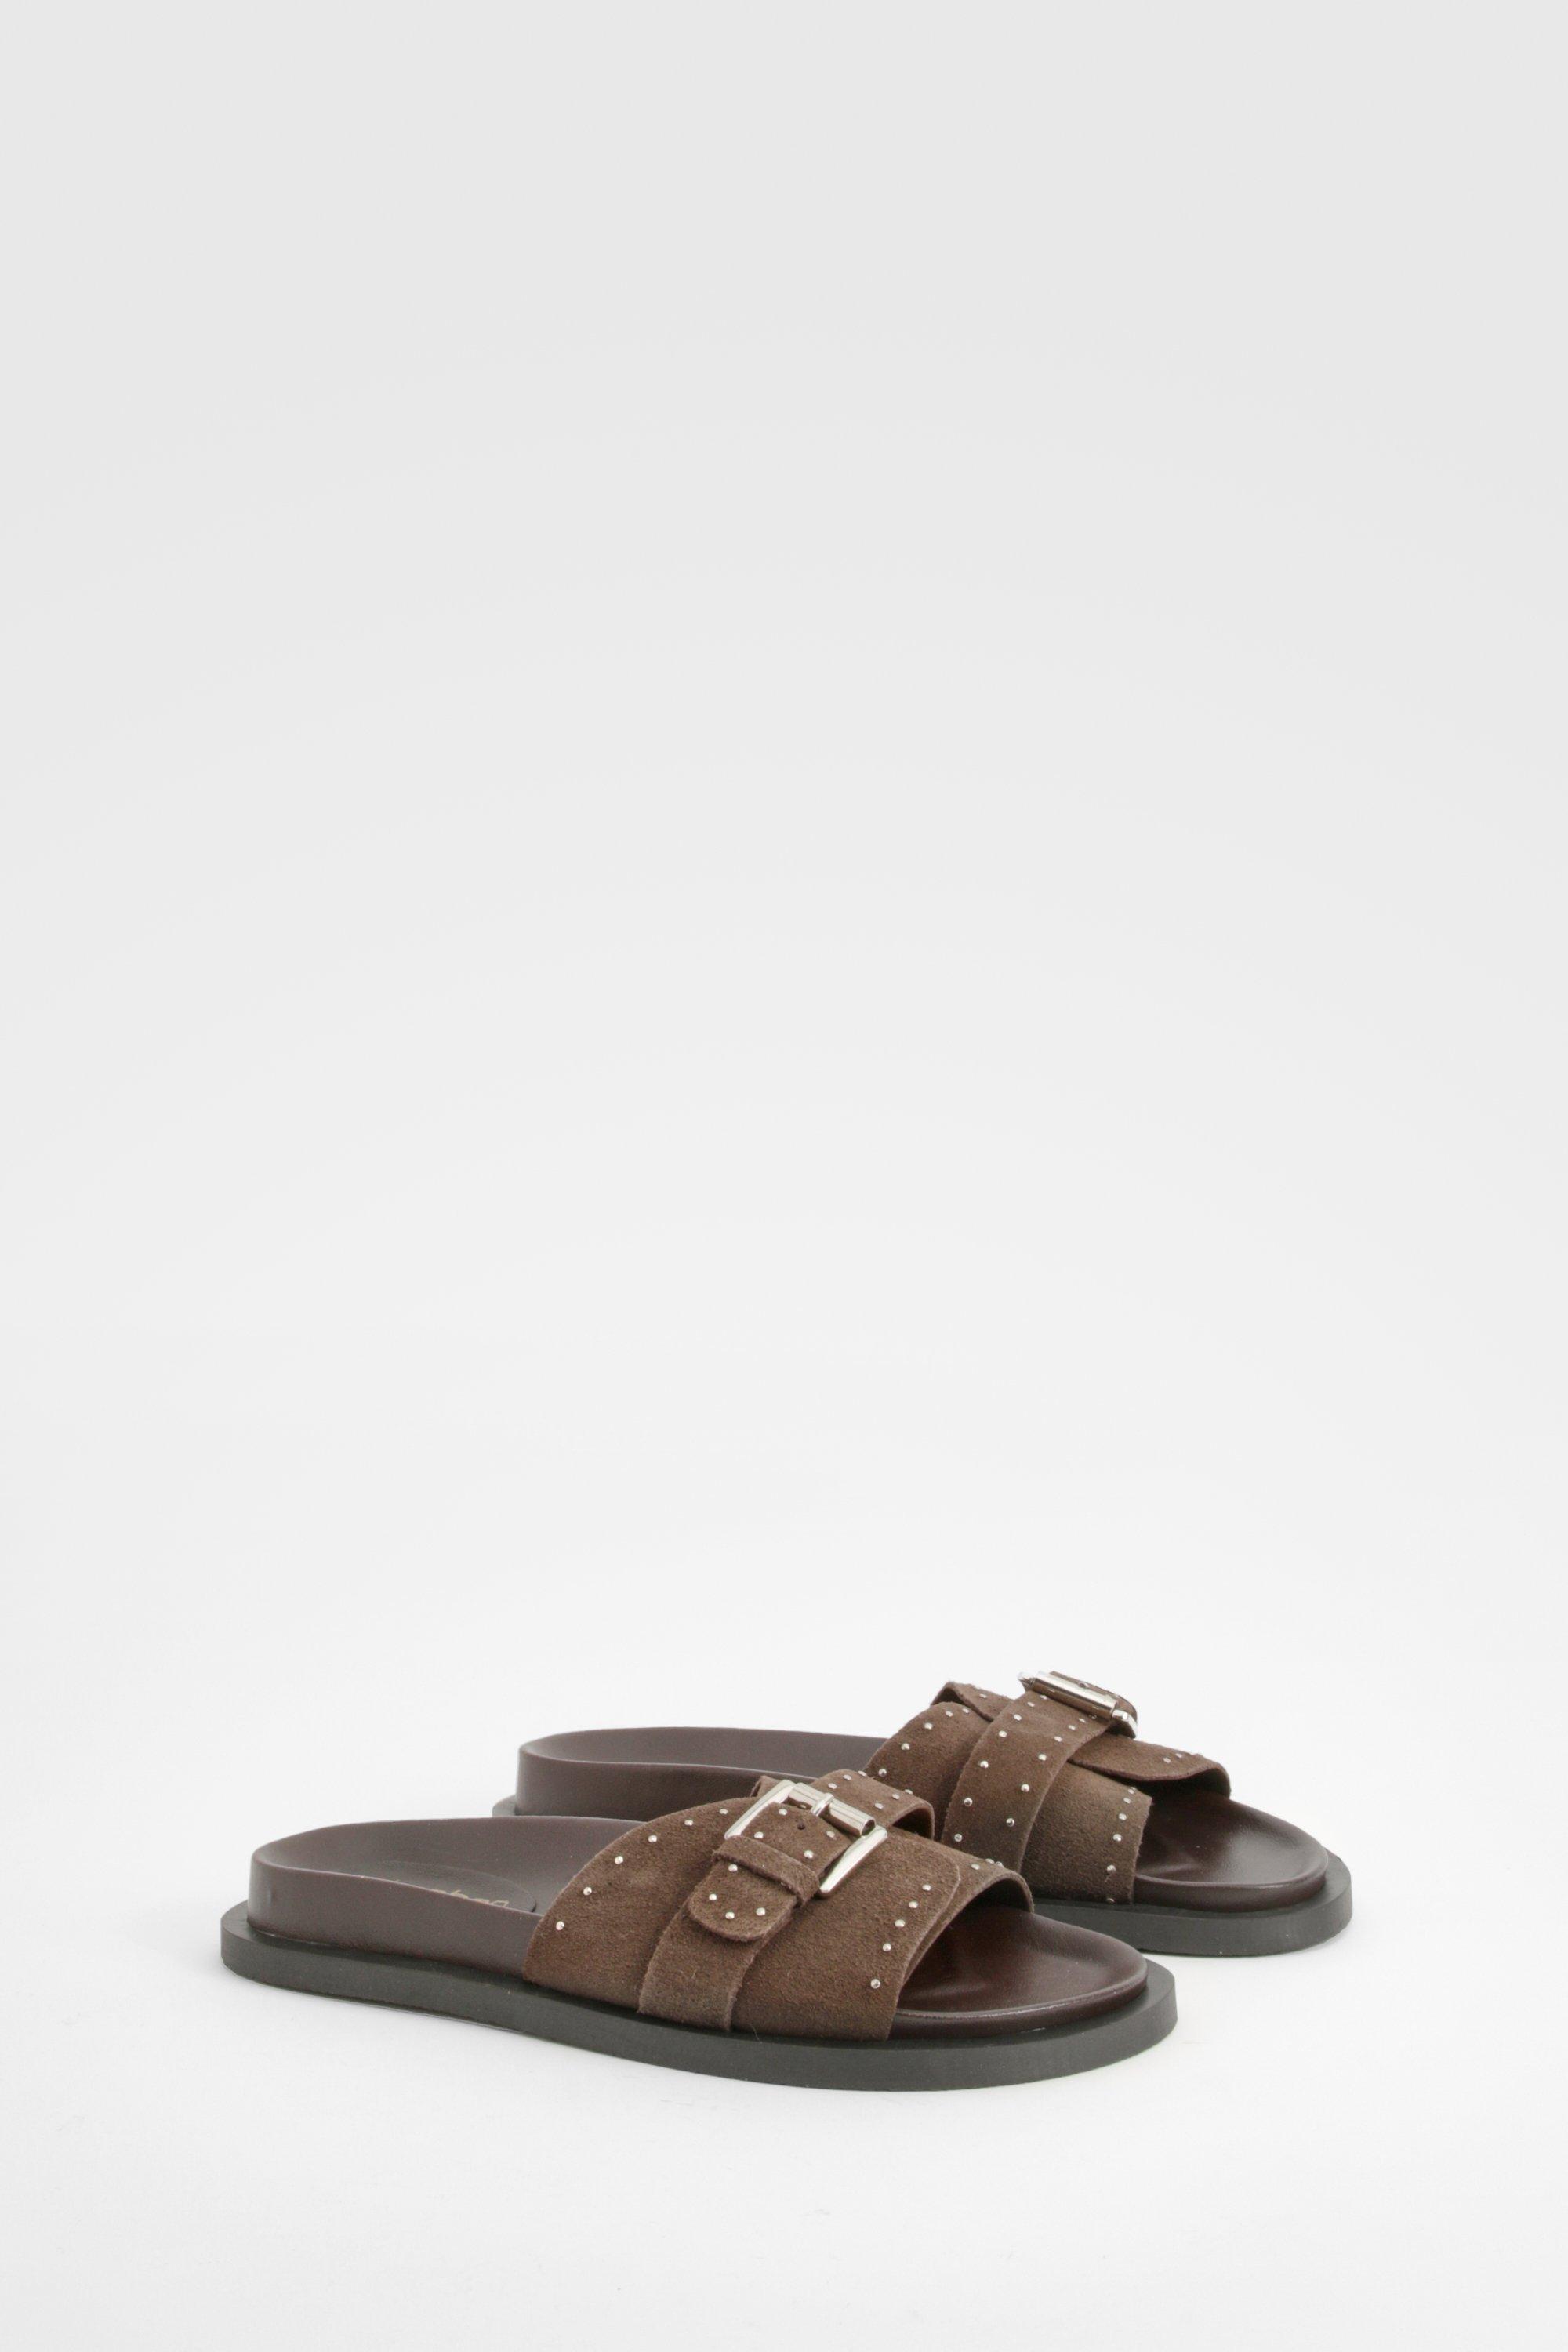 Image of Studded Leather Sliders, Brown